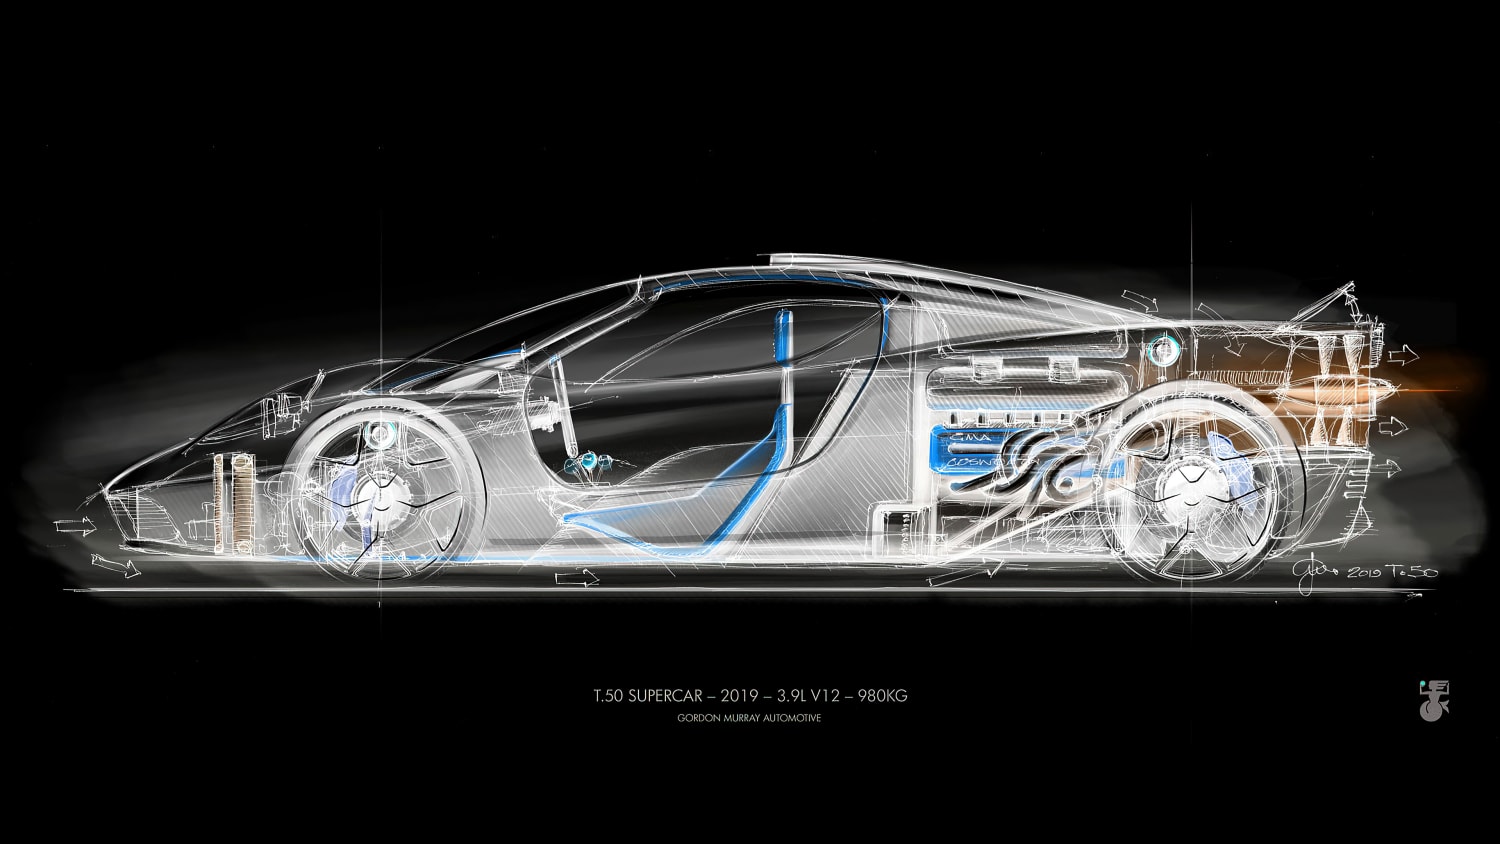 Gordon Murray's T.50 Supercar Sketch Inverted